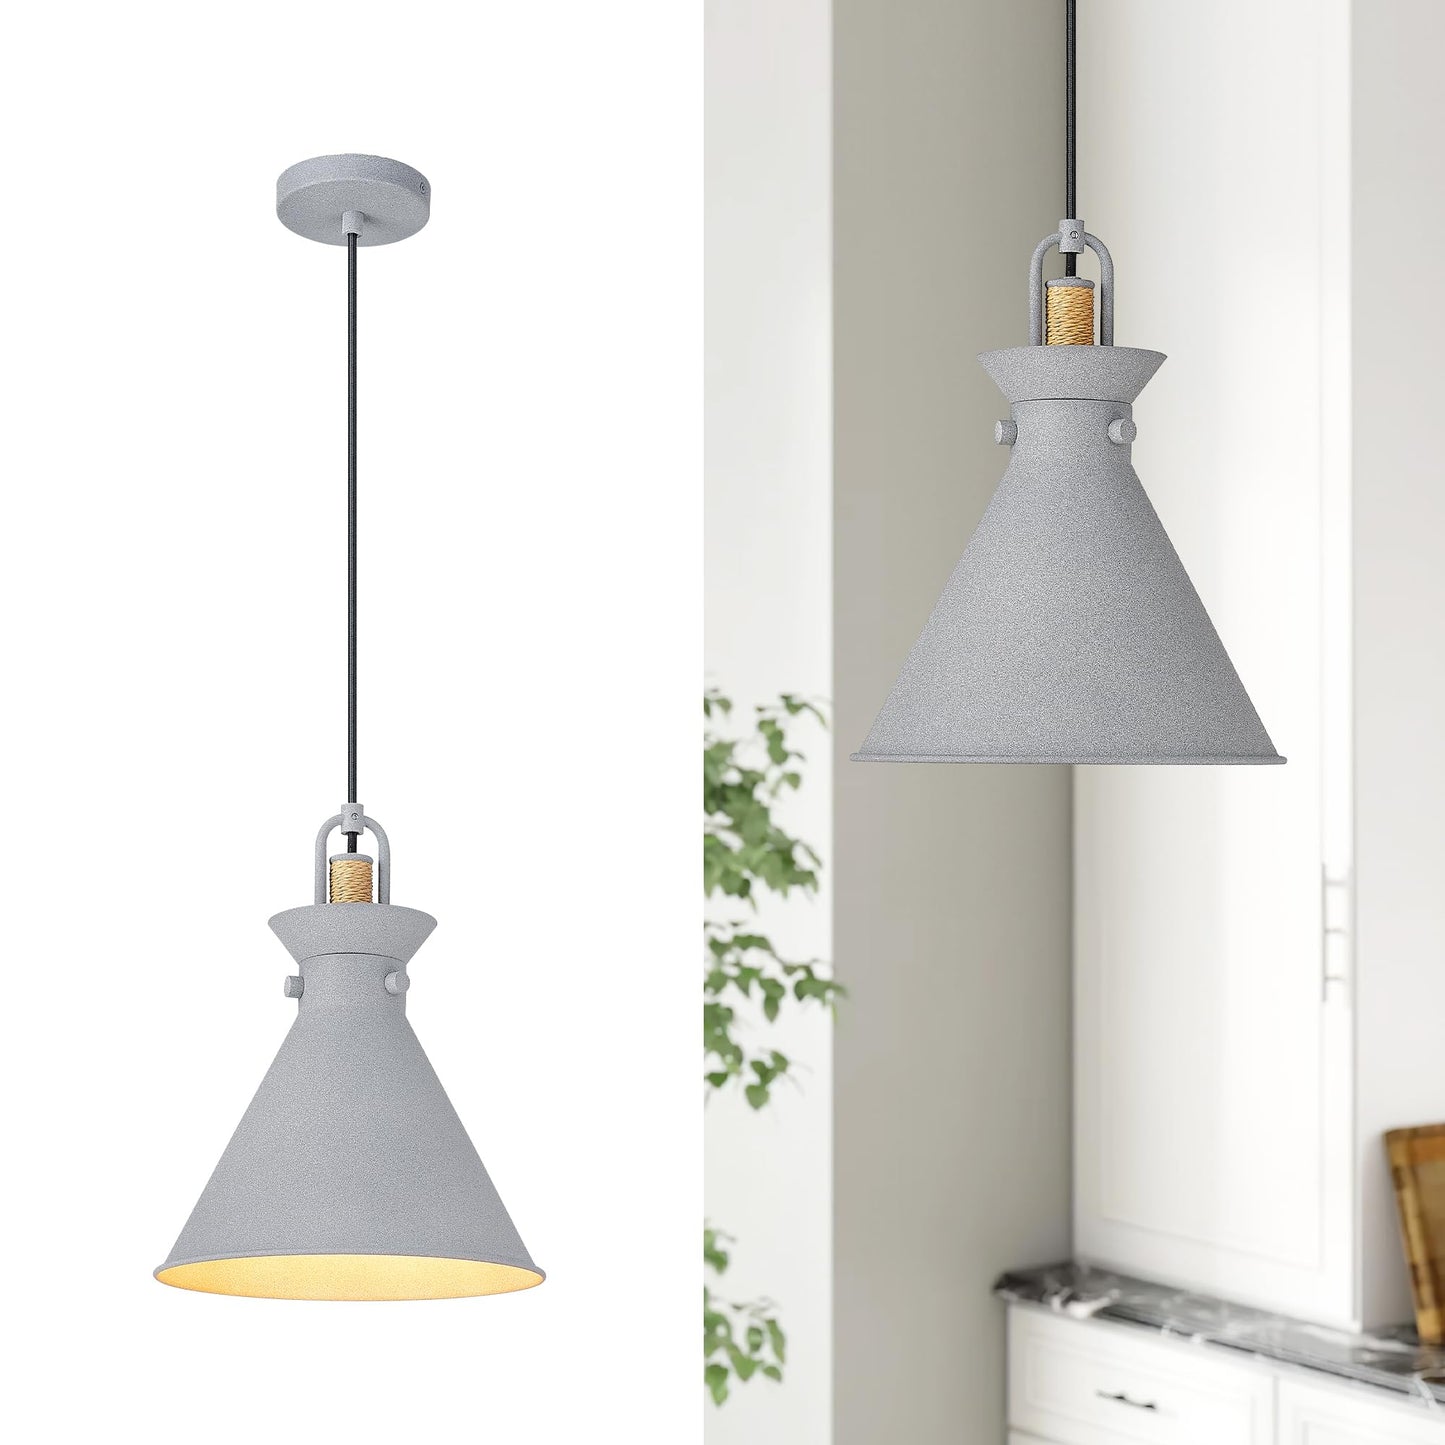 
                  
                    Emliviar Pendant Light Fixtures 10.5", 1-Light Industrial Adjustable Hanging Lamp for Kitchen Bedroom, Metal Cone lampshade in Frosted Grey Finish, YSE2MIL Grey
                  
                